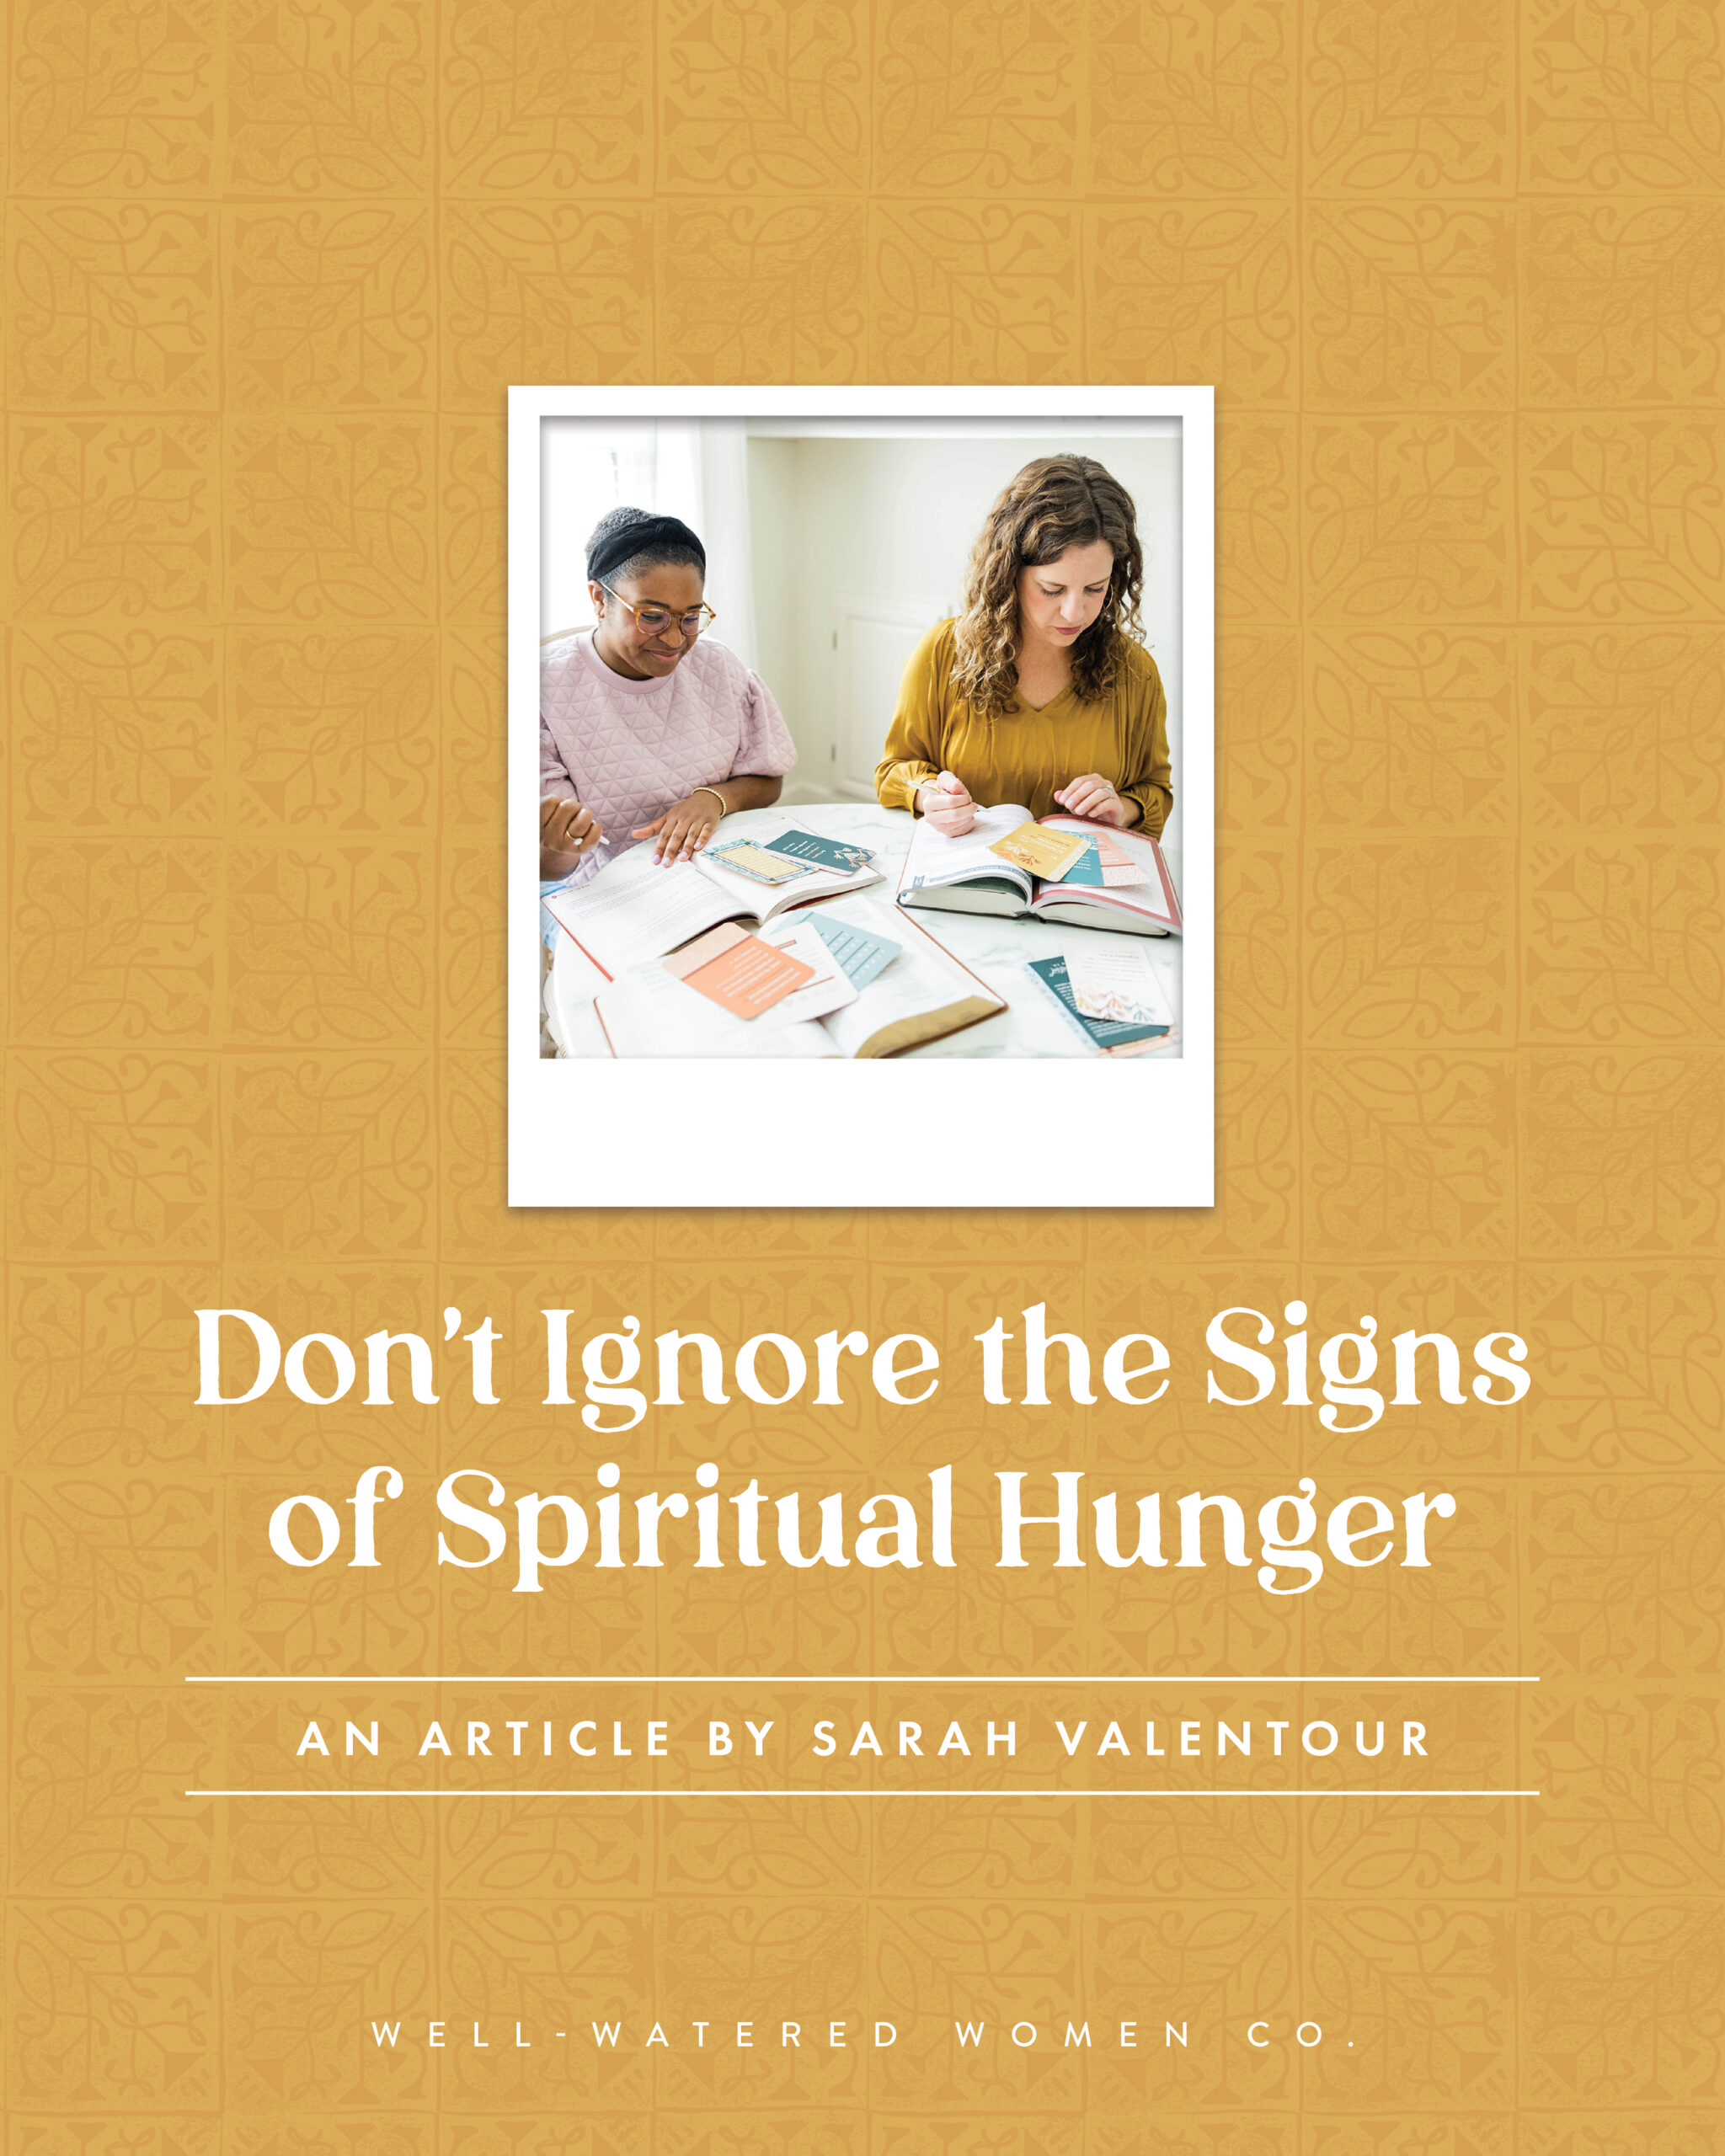 Don't Ignore the Signs of Spiritual Hunger - an article from Well-Watered Women